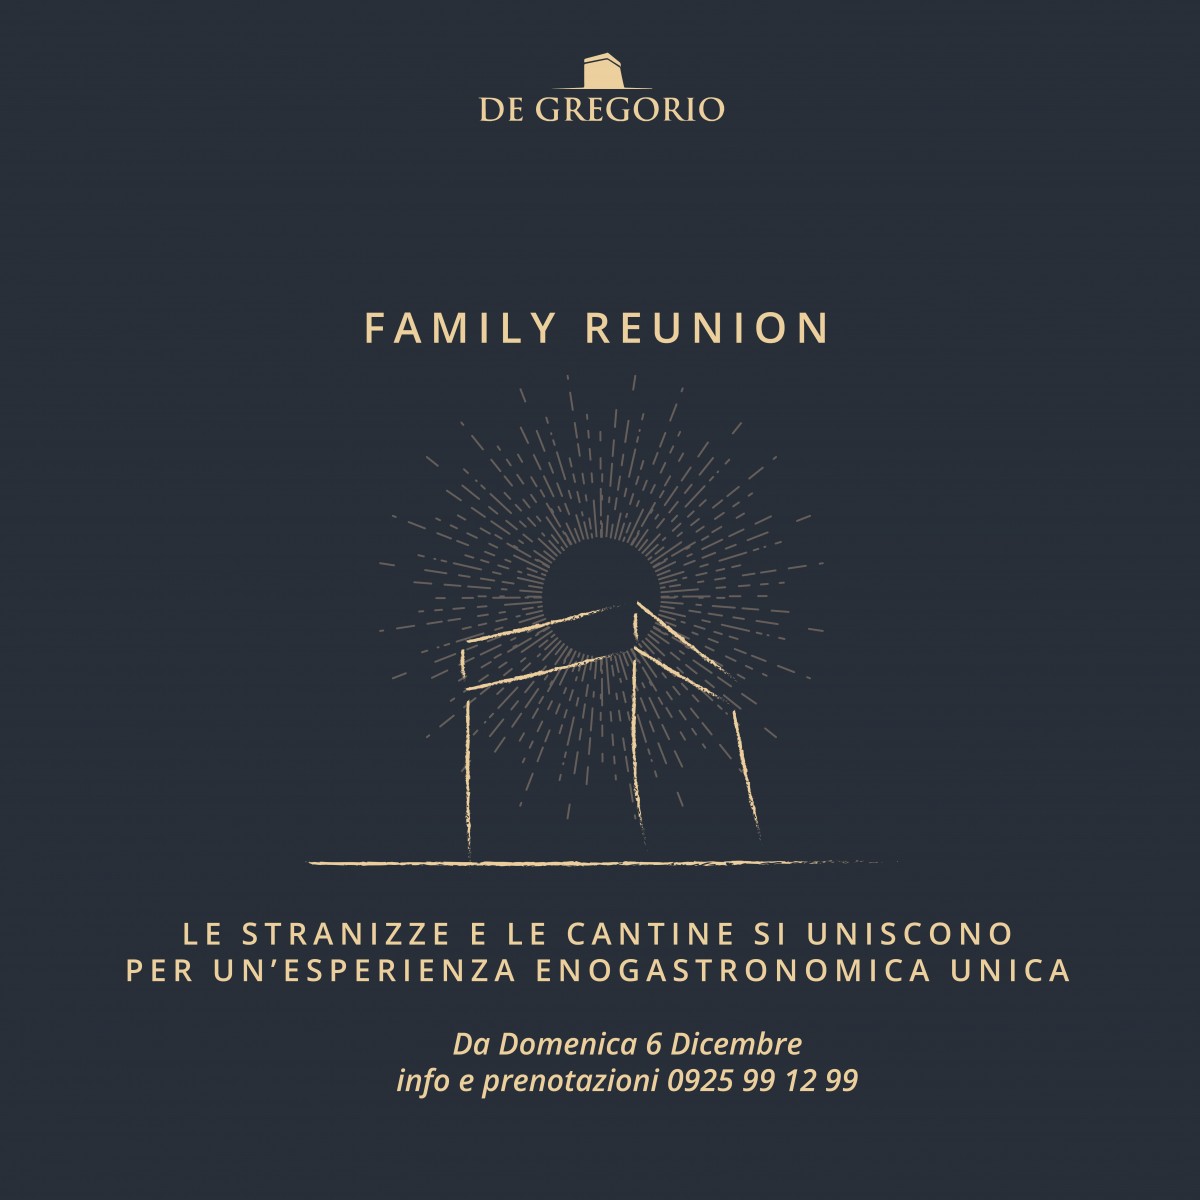 Family reunion: a unique tasting experience